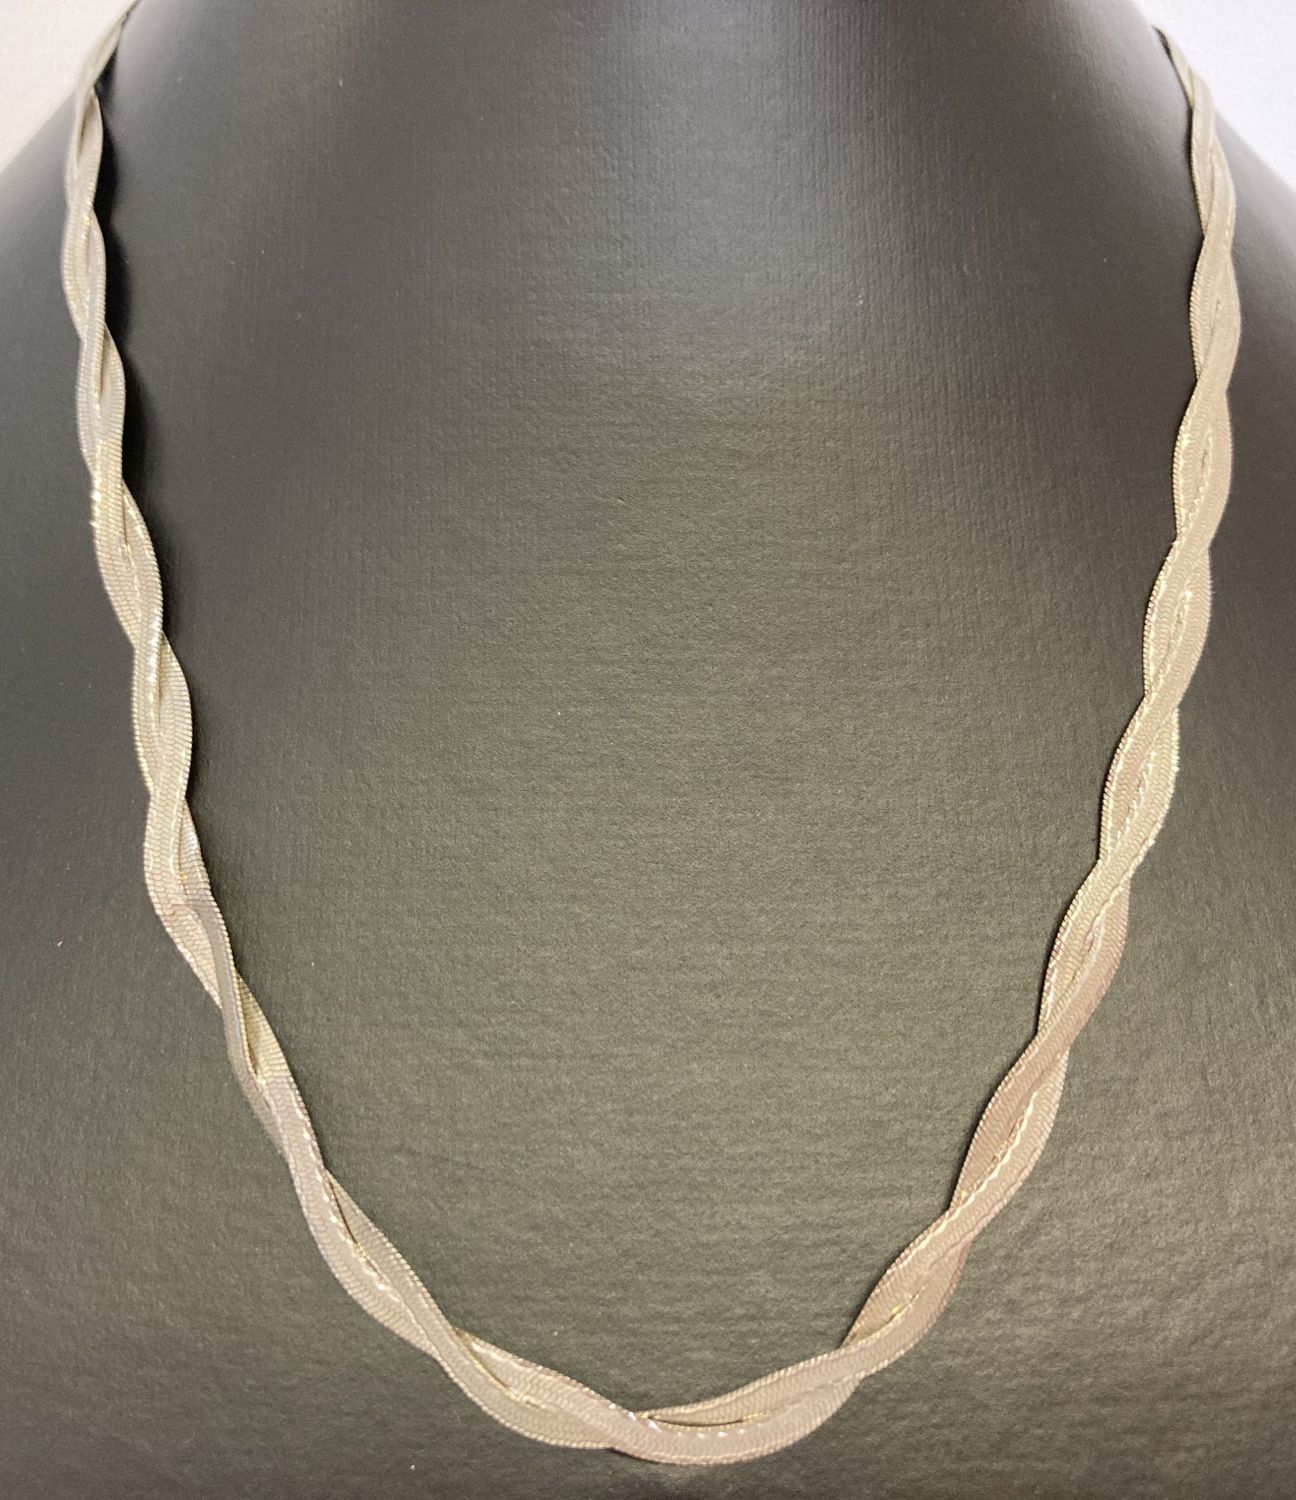 A plaited design 9ct white gold herringbone chain necklace with rose gold clasp.